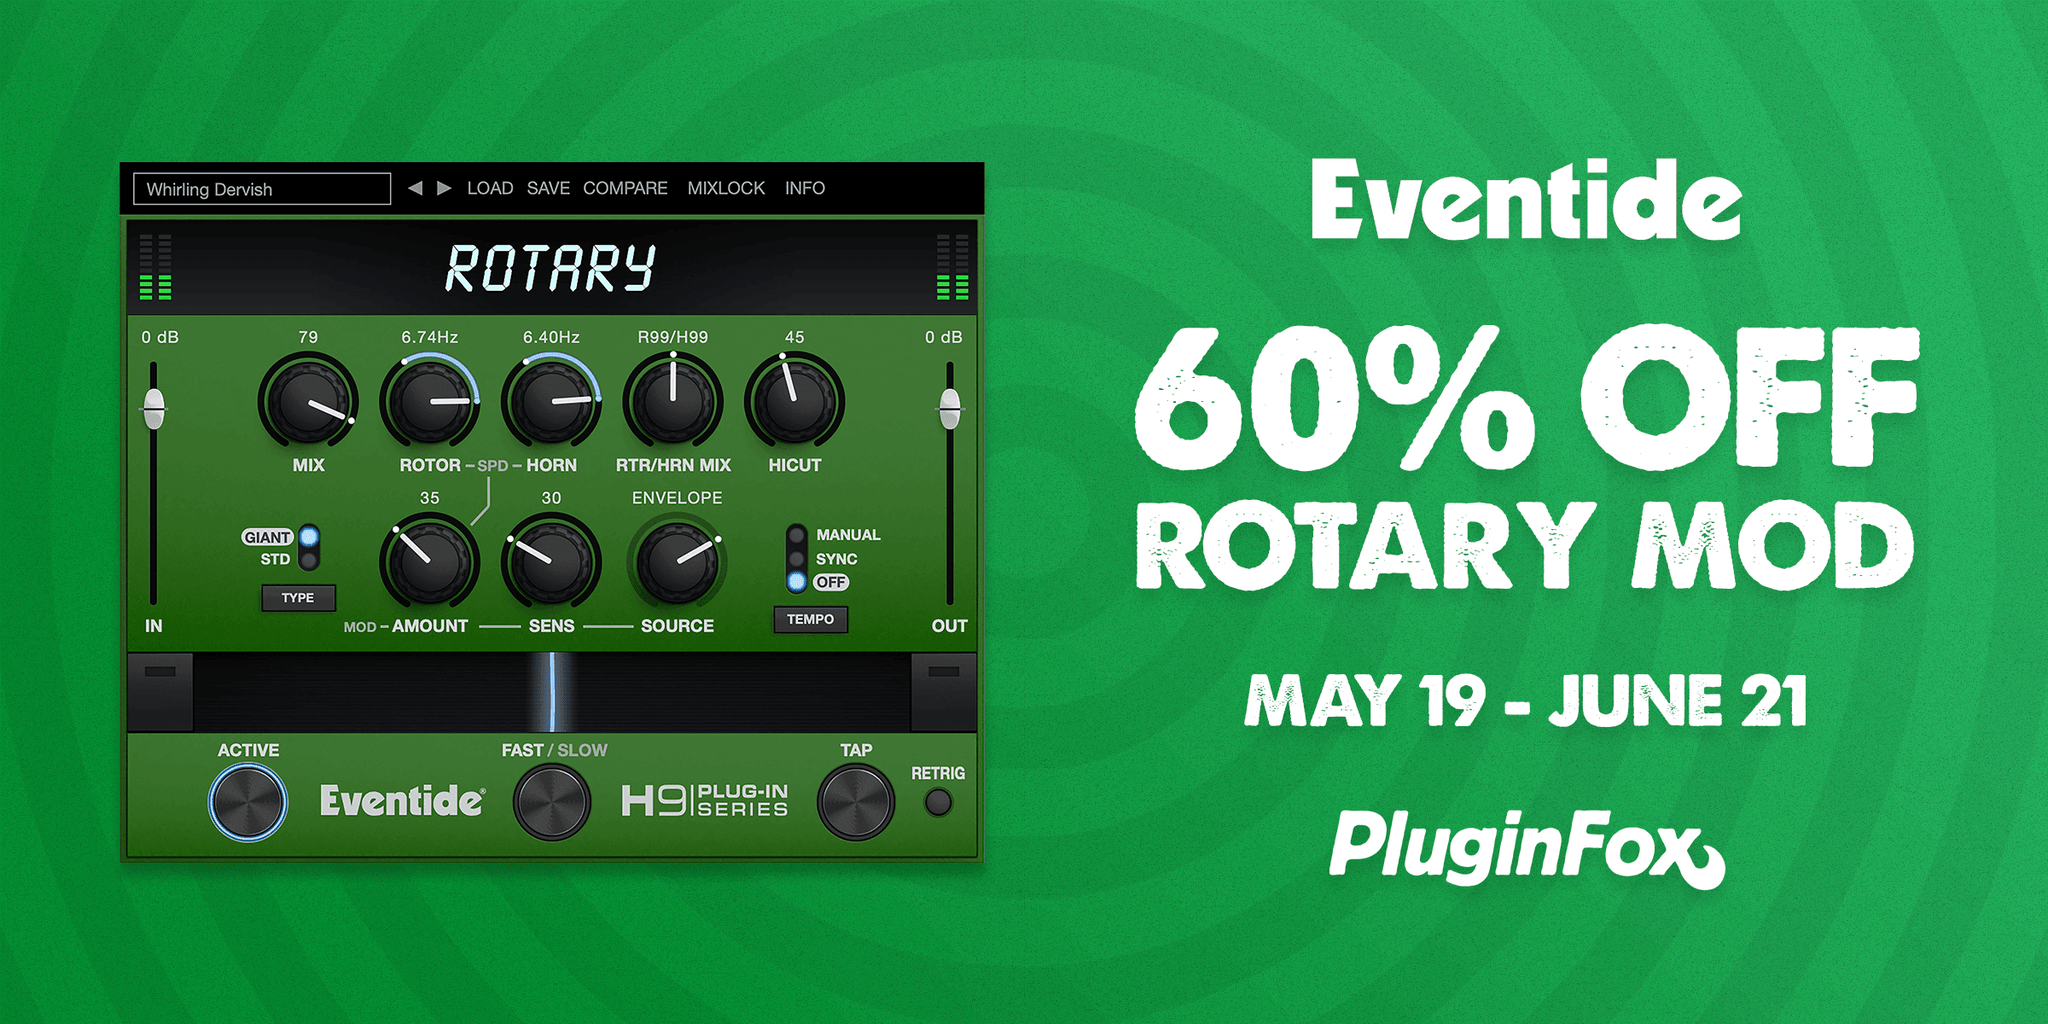 Eventide Rotary Mod Intro Sale - May 19 - June 21